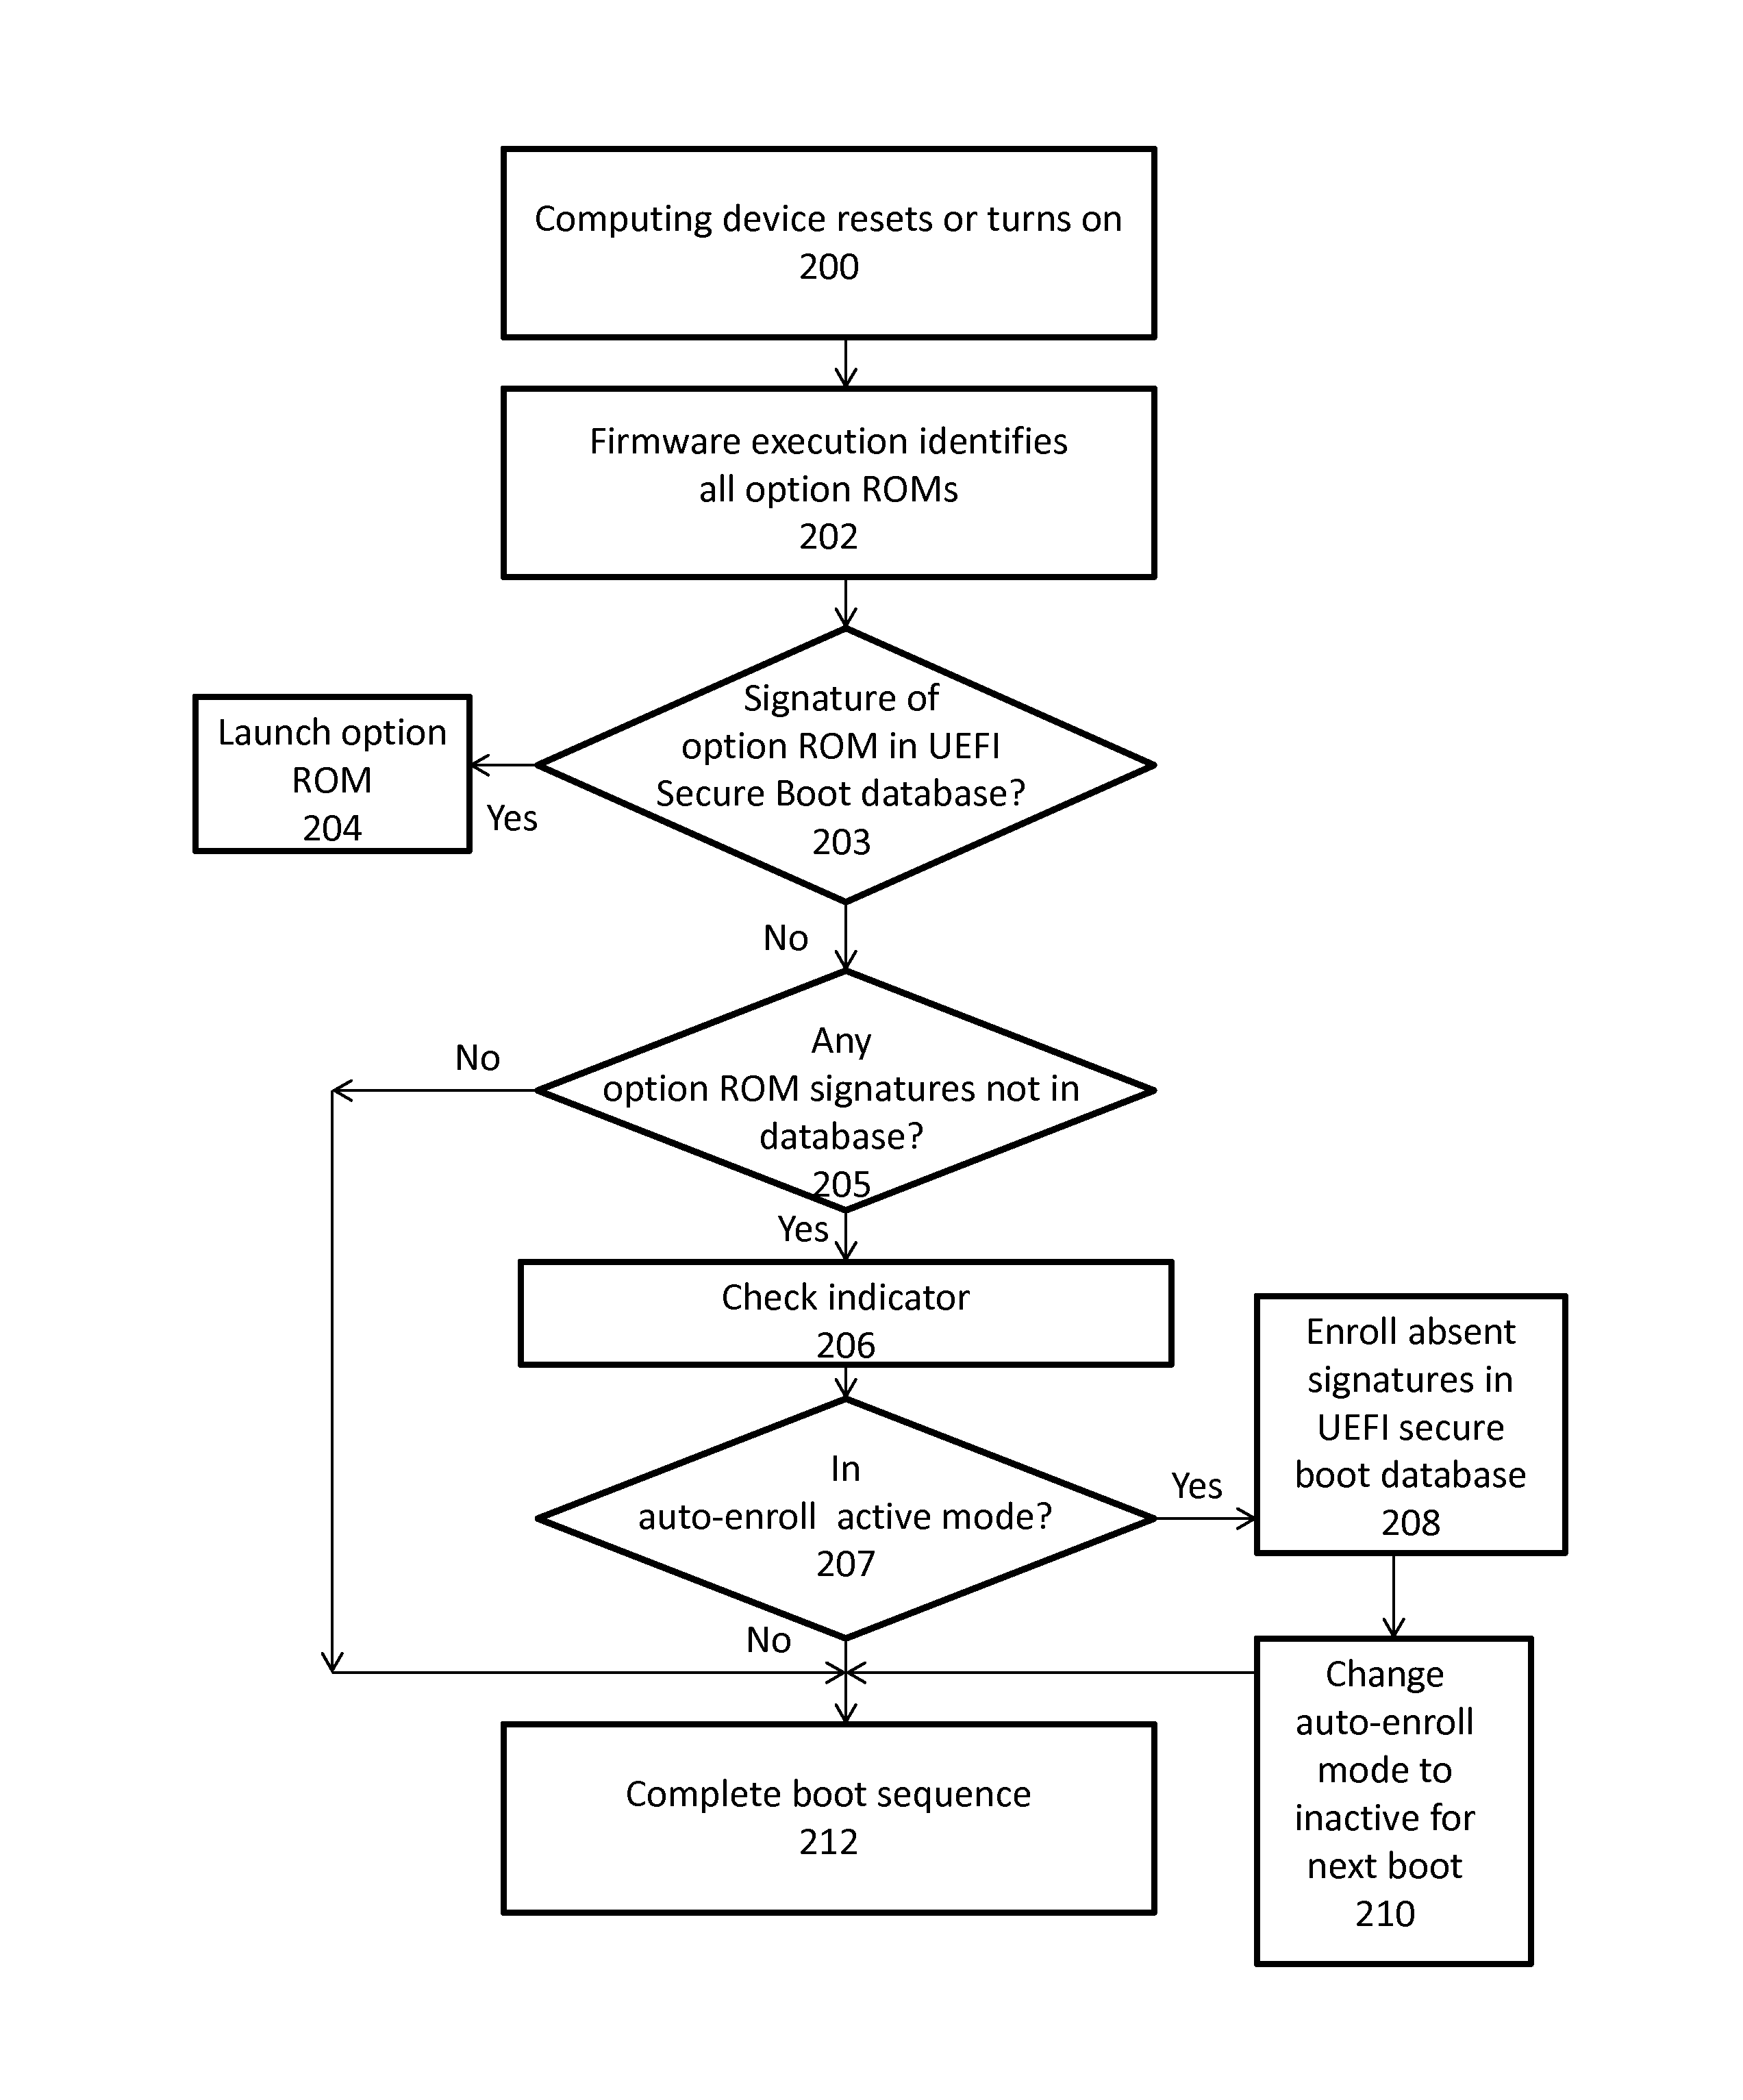 System and method for auto-enrolling option ROMS in a UEFI secure boot database